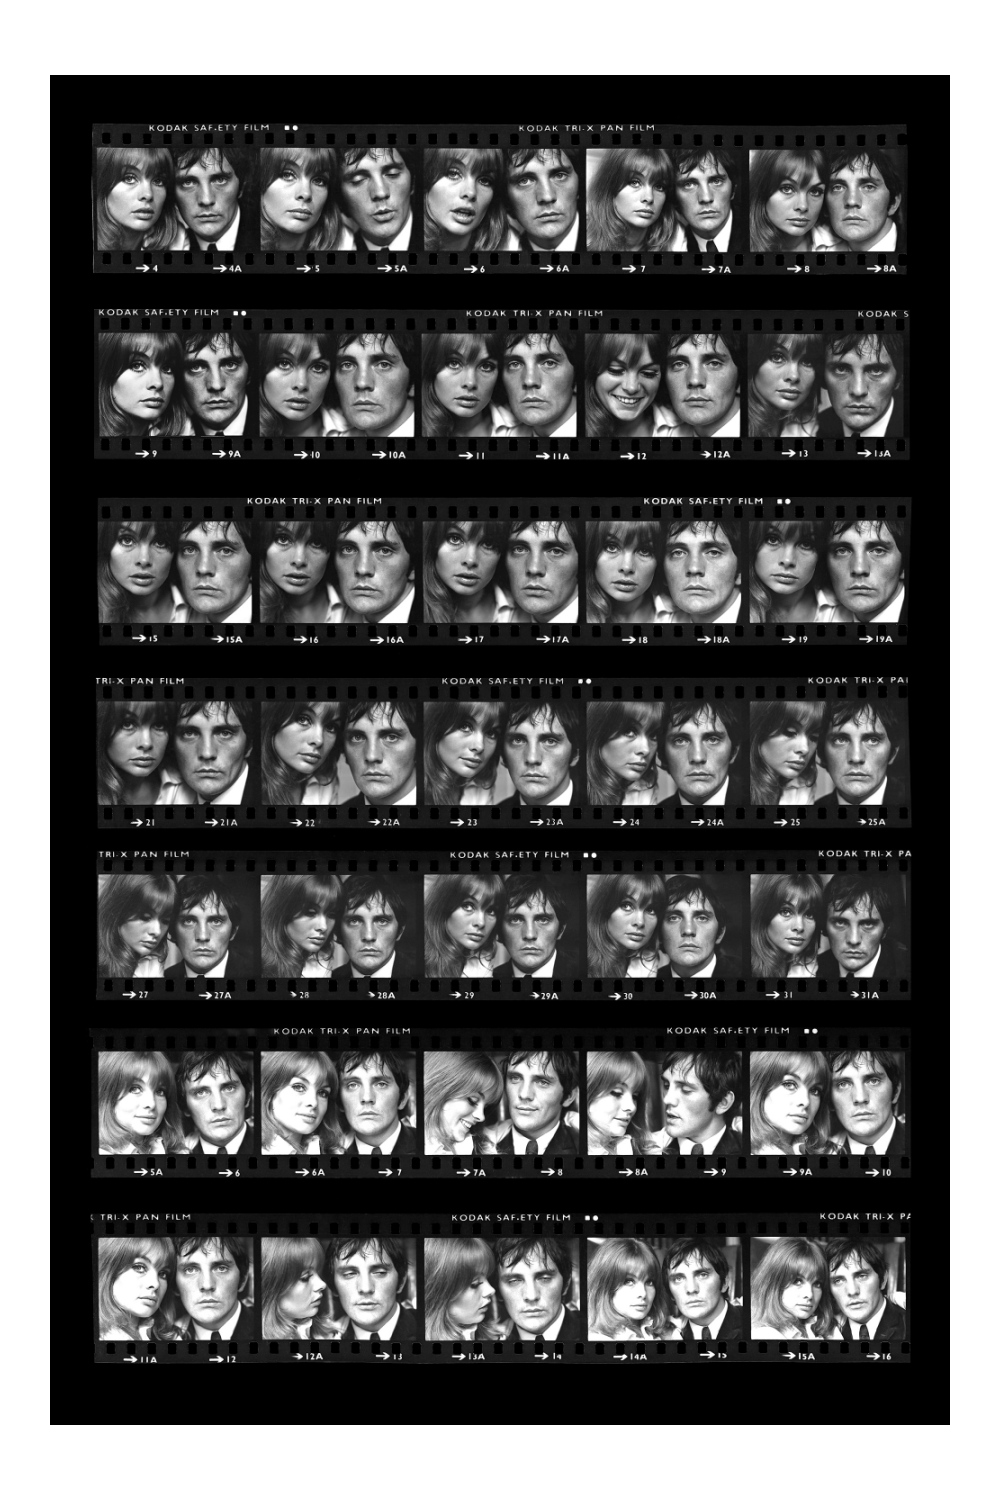 Iconic Couple Photographic Artwork | Andrew Martin Faces Of The Sixties - Jean Shrimpton and Terence Stamp | Oroa.com